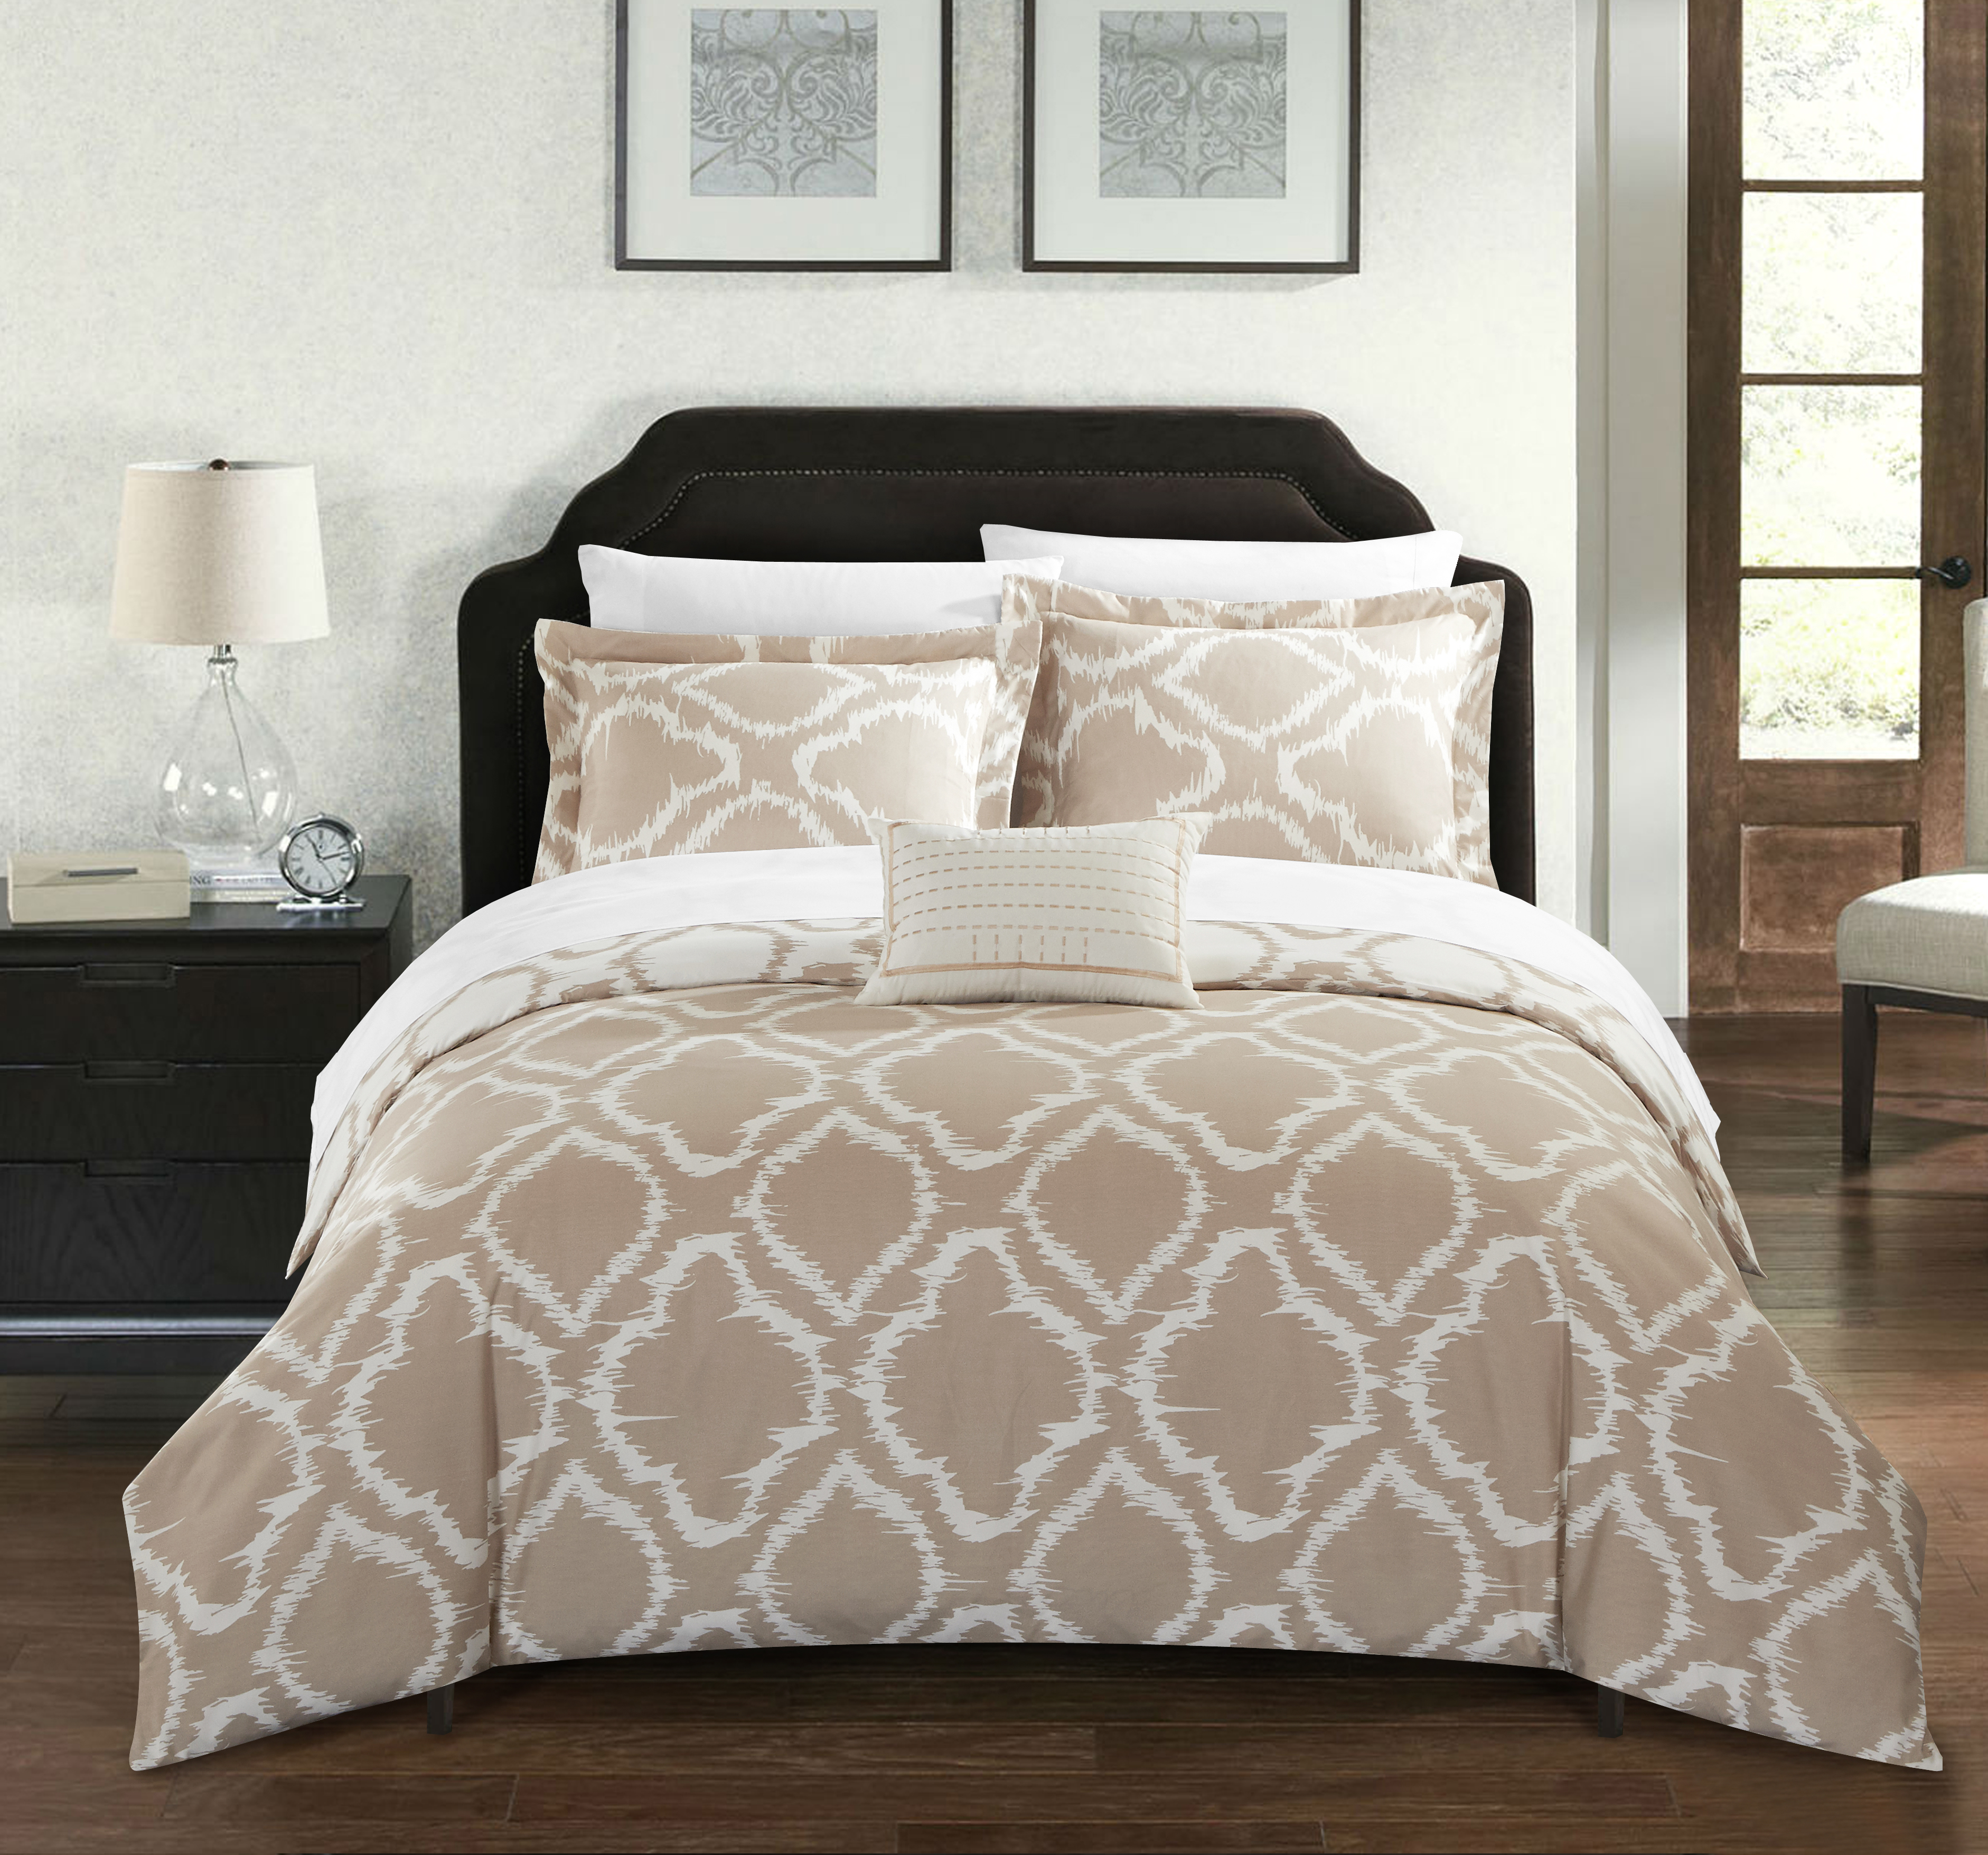 Chic Home Asya Reversible Bed in a Bag Duvet Cover Set